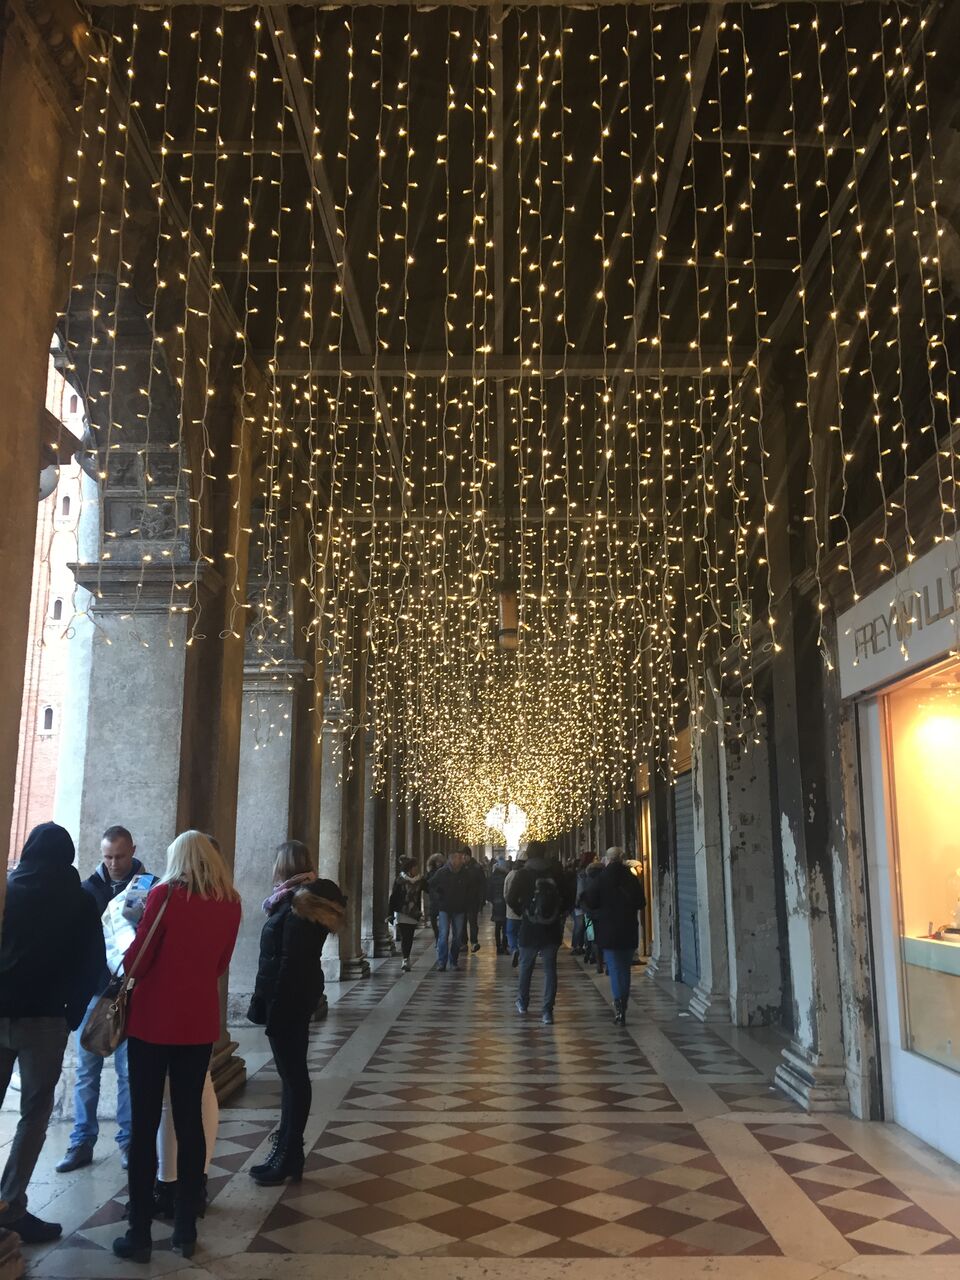 Winter travelers in the Piazza